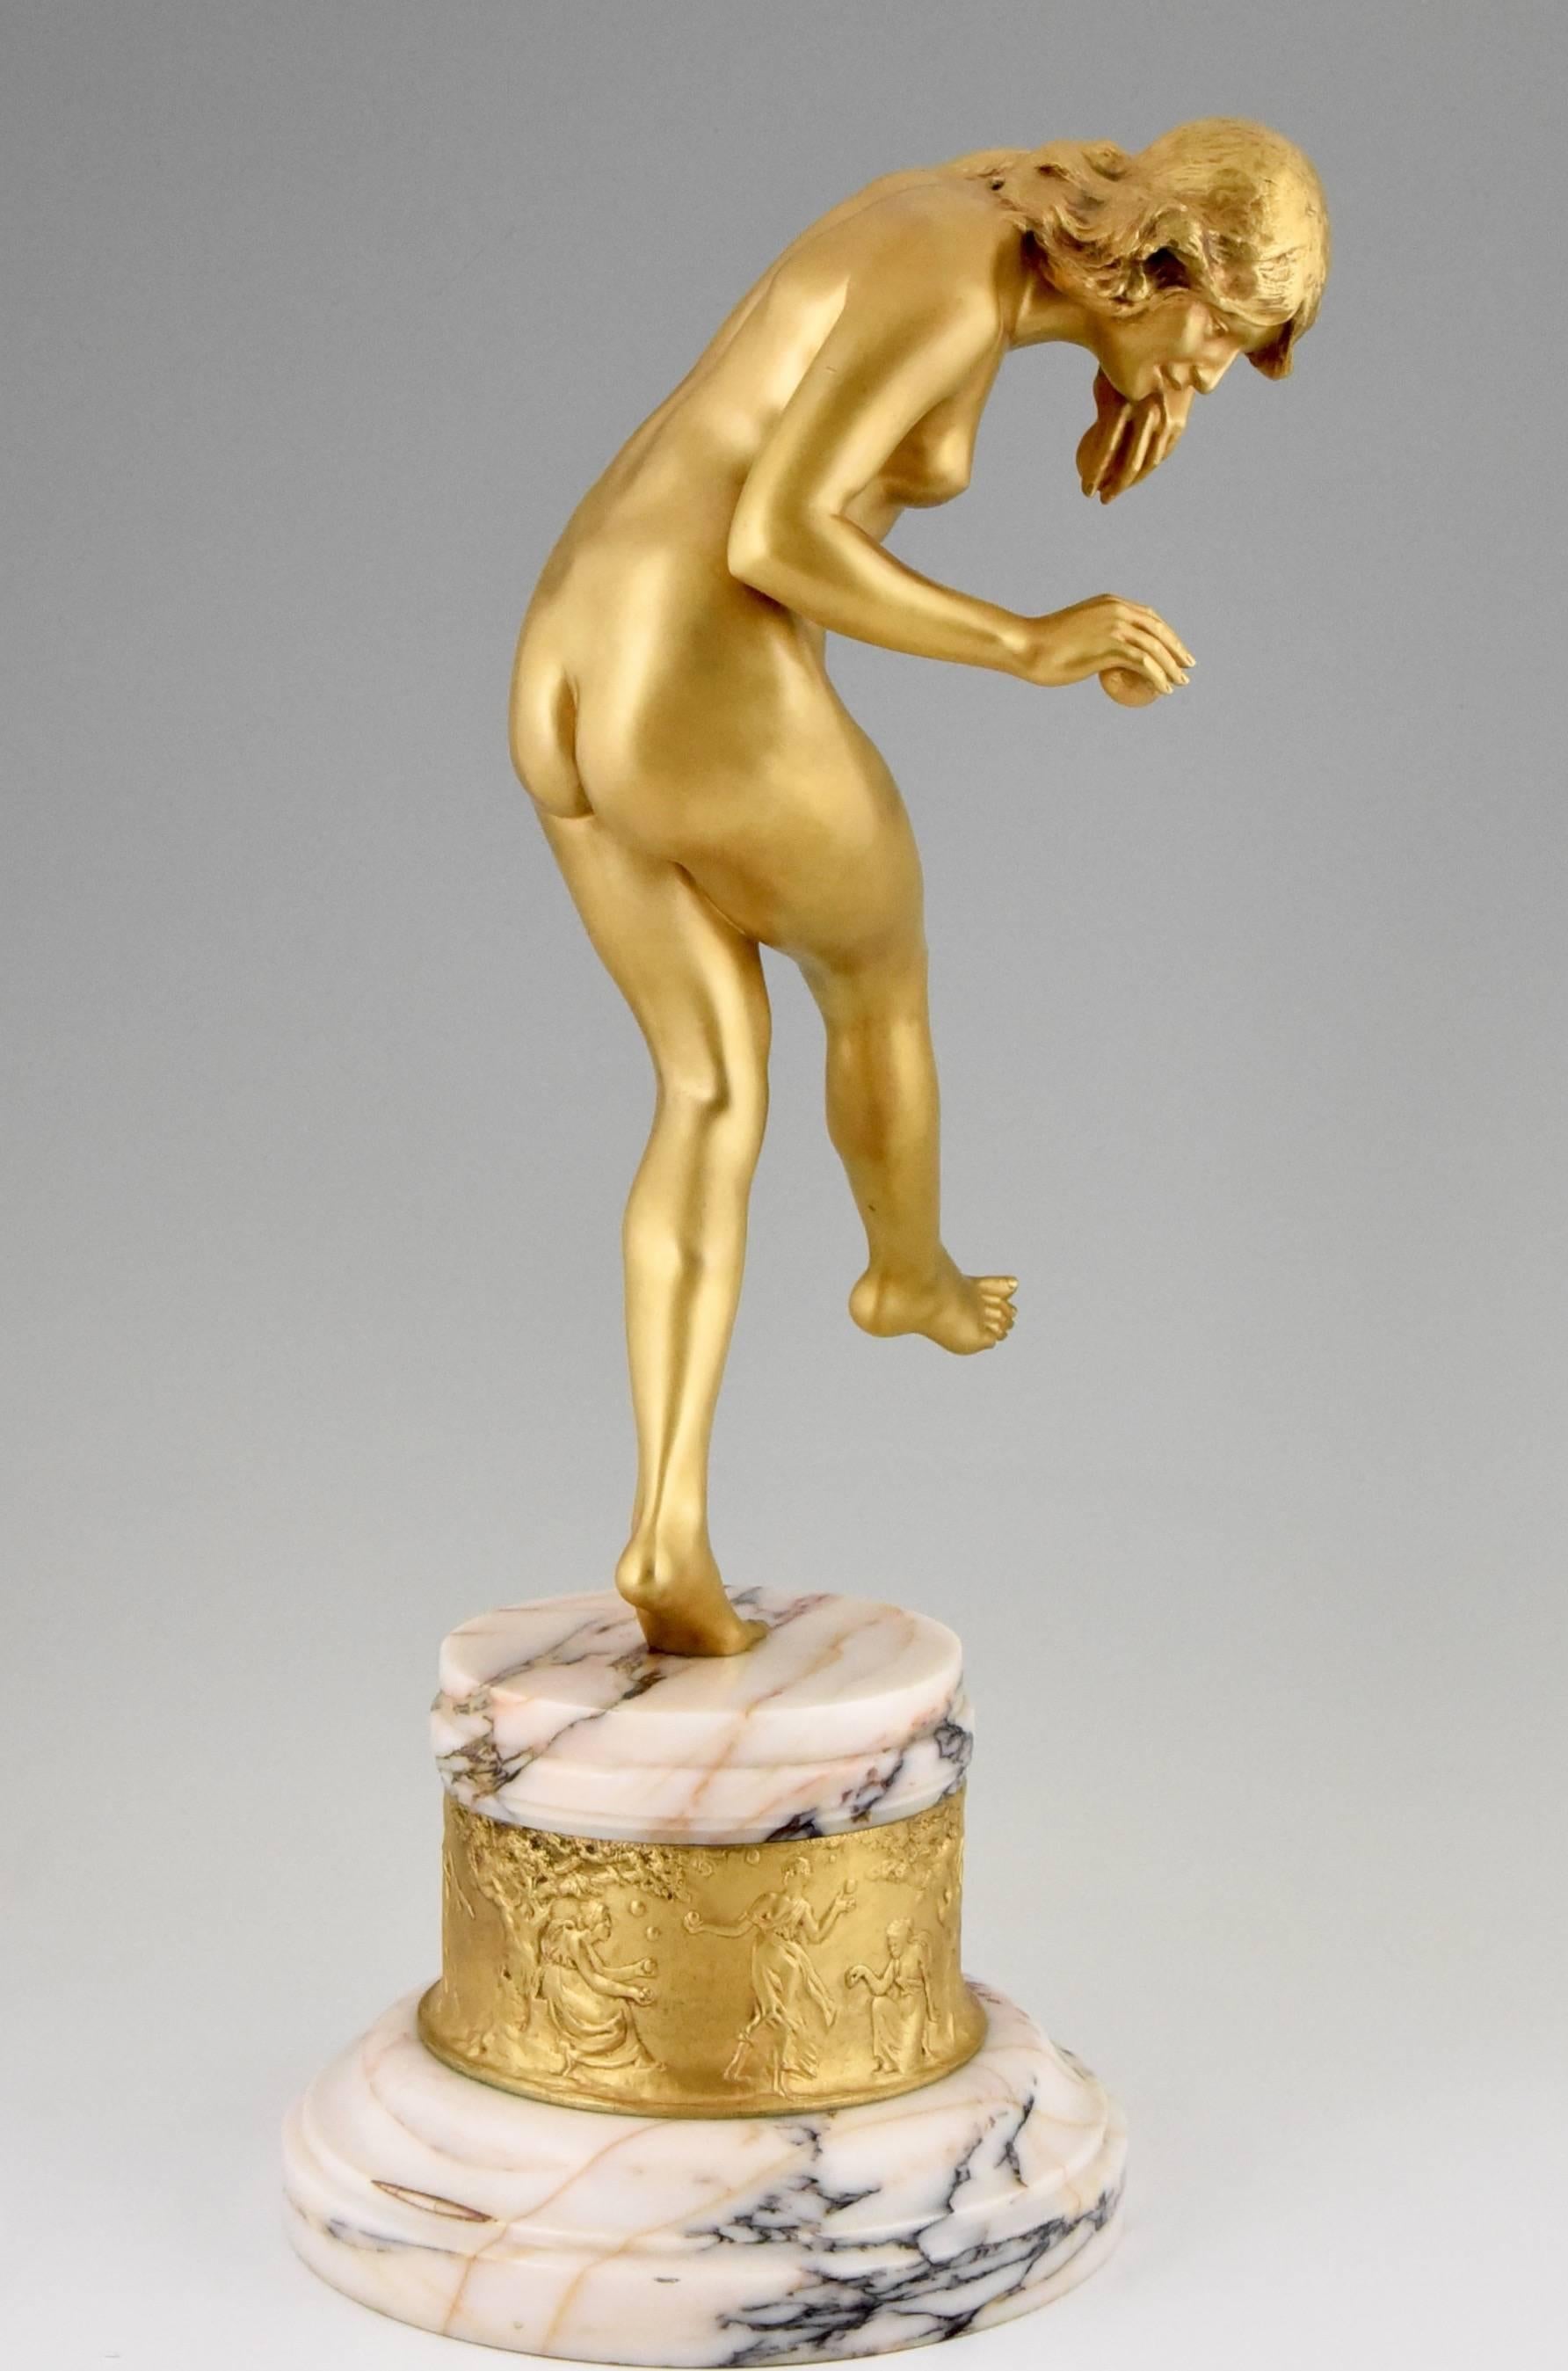 “Dance of the apple”
An Art Deco gilt bronze nude on a marble and bronze base.
The base has a gilt bronze relief decoration of nymphs dancing between trees signed by the French artist Louis Marie Jules Delapchier,

A picture of this bronze can